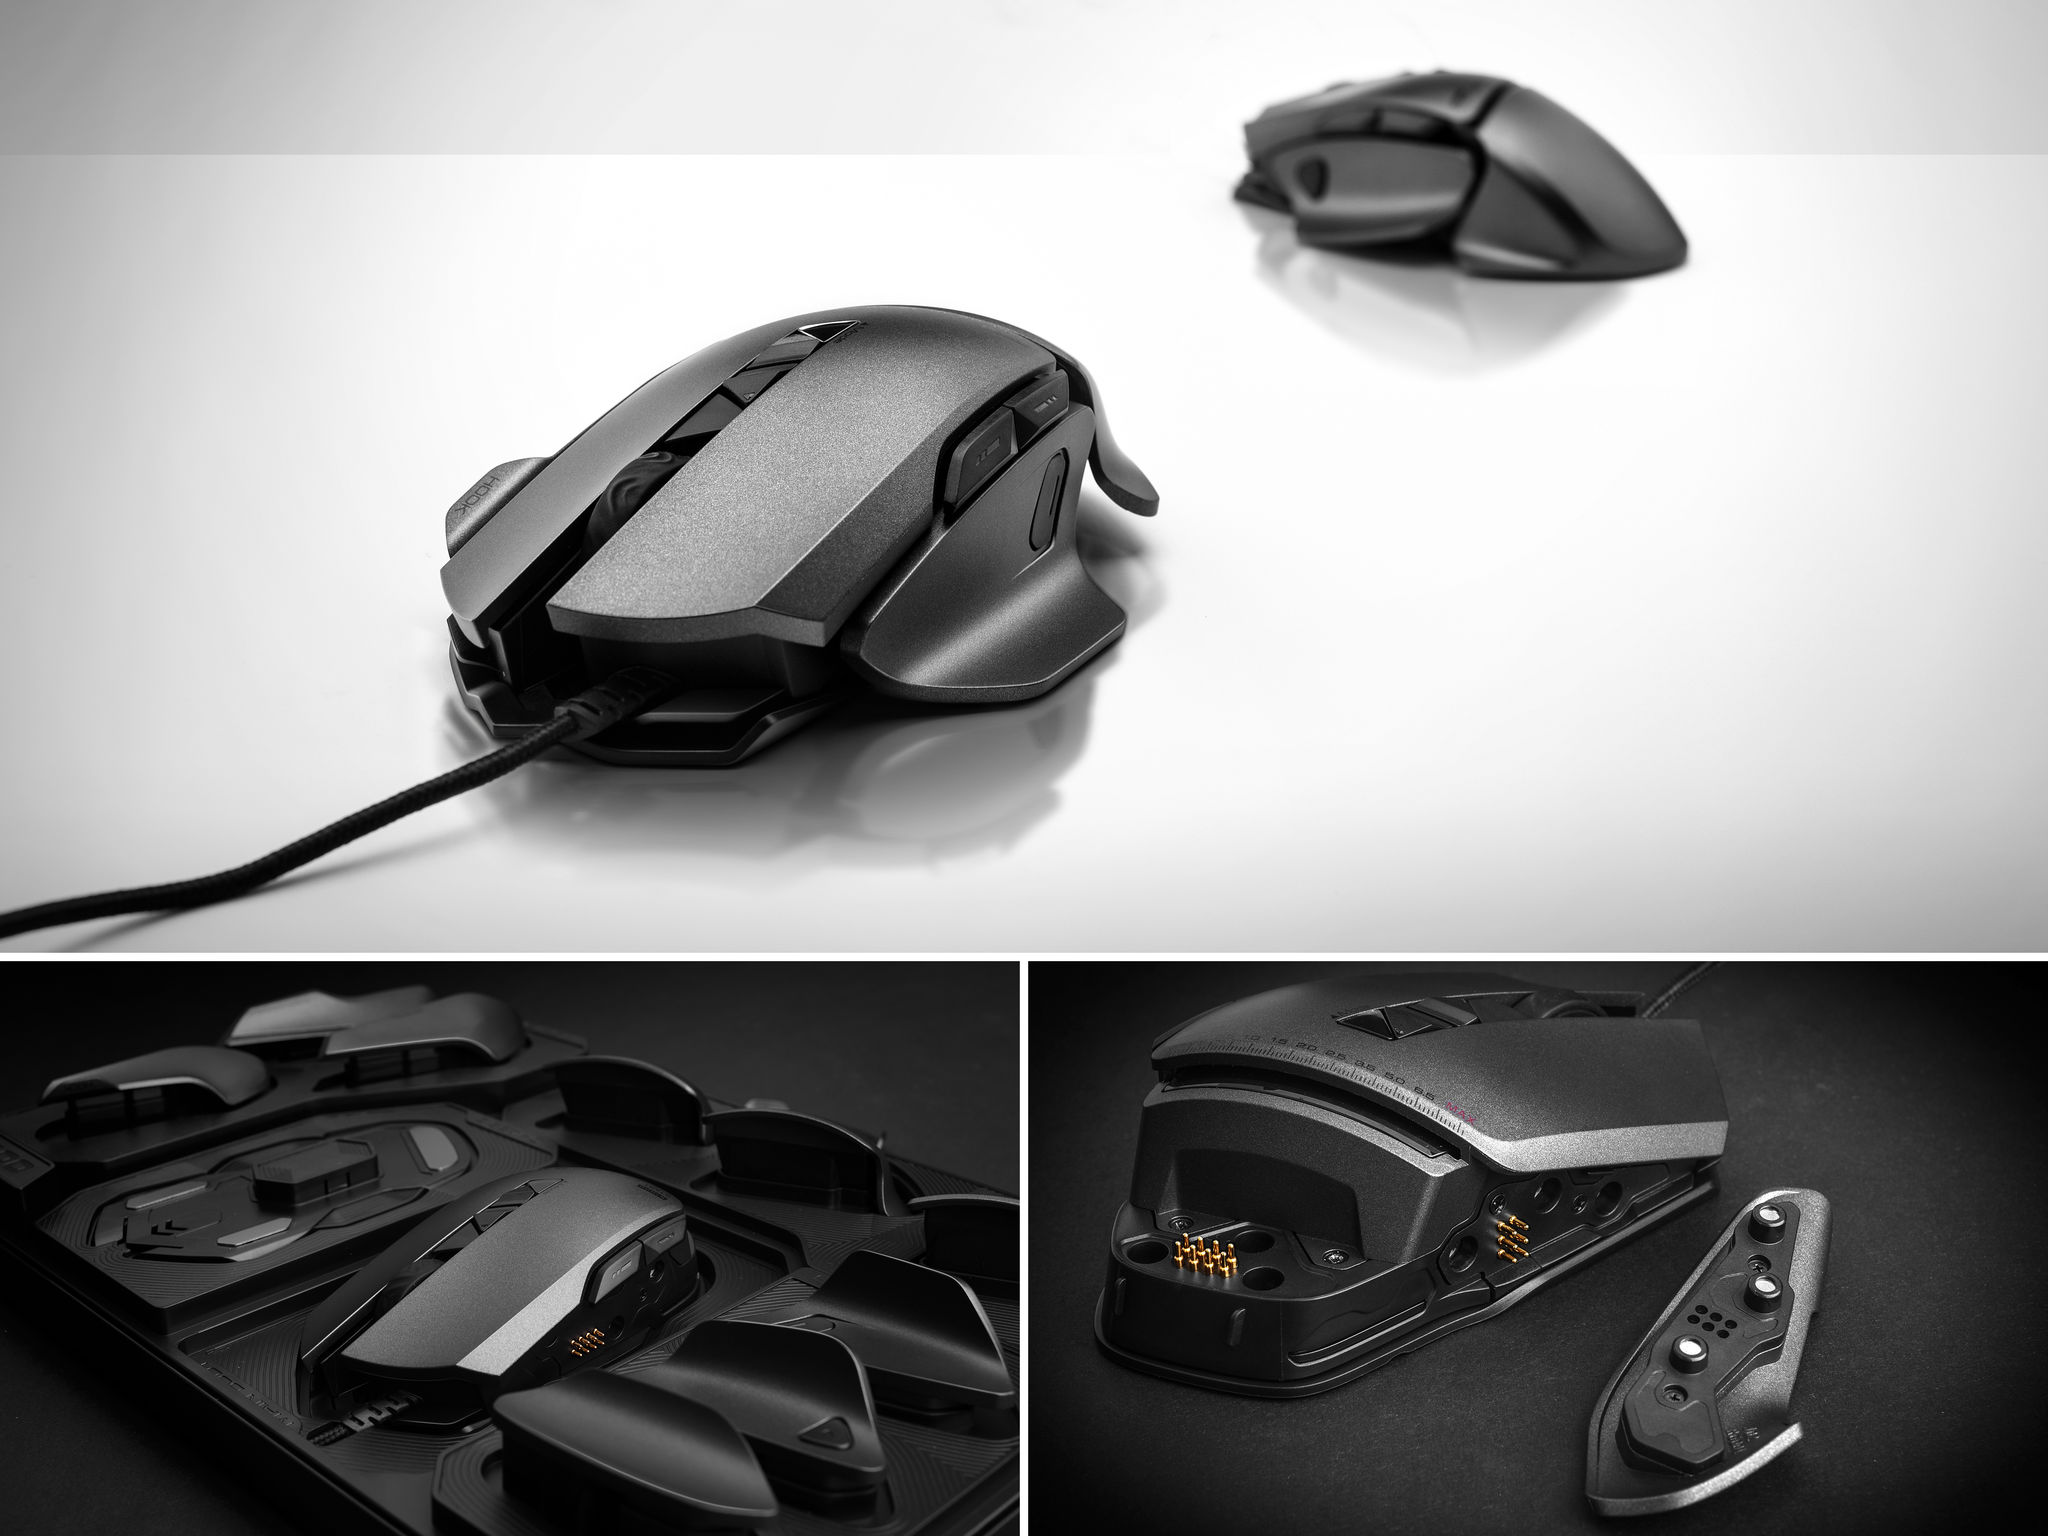 007 Gaming Mouse